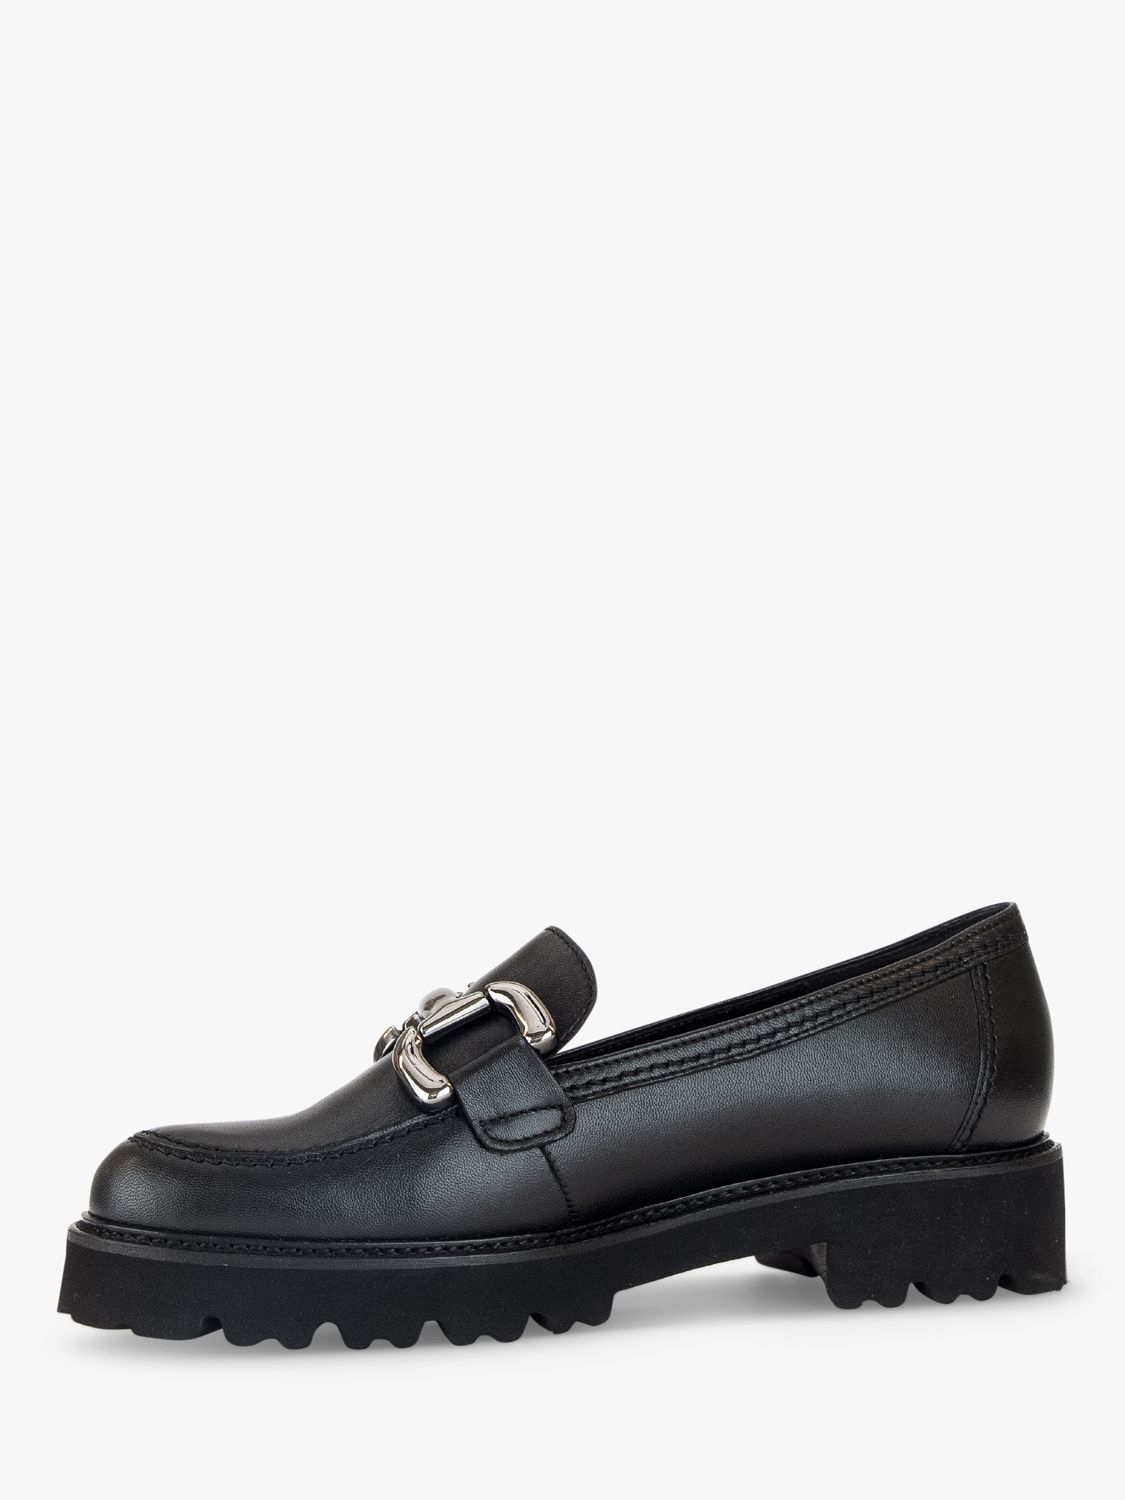 Gabor Donna Leather Loafers, Black at John Lewis & Partners